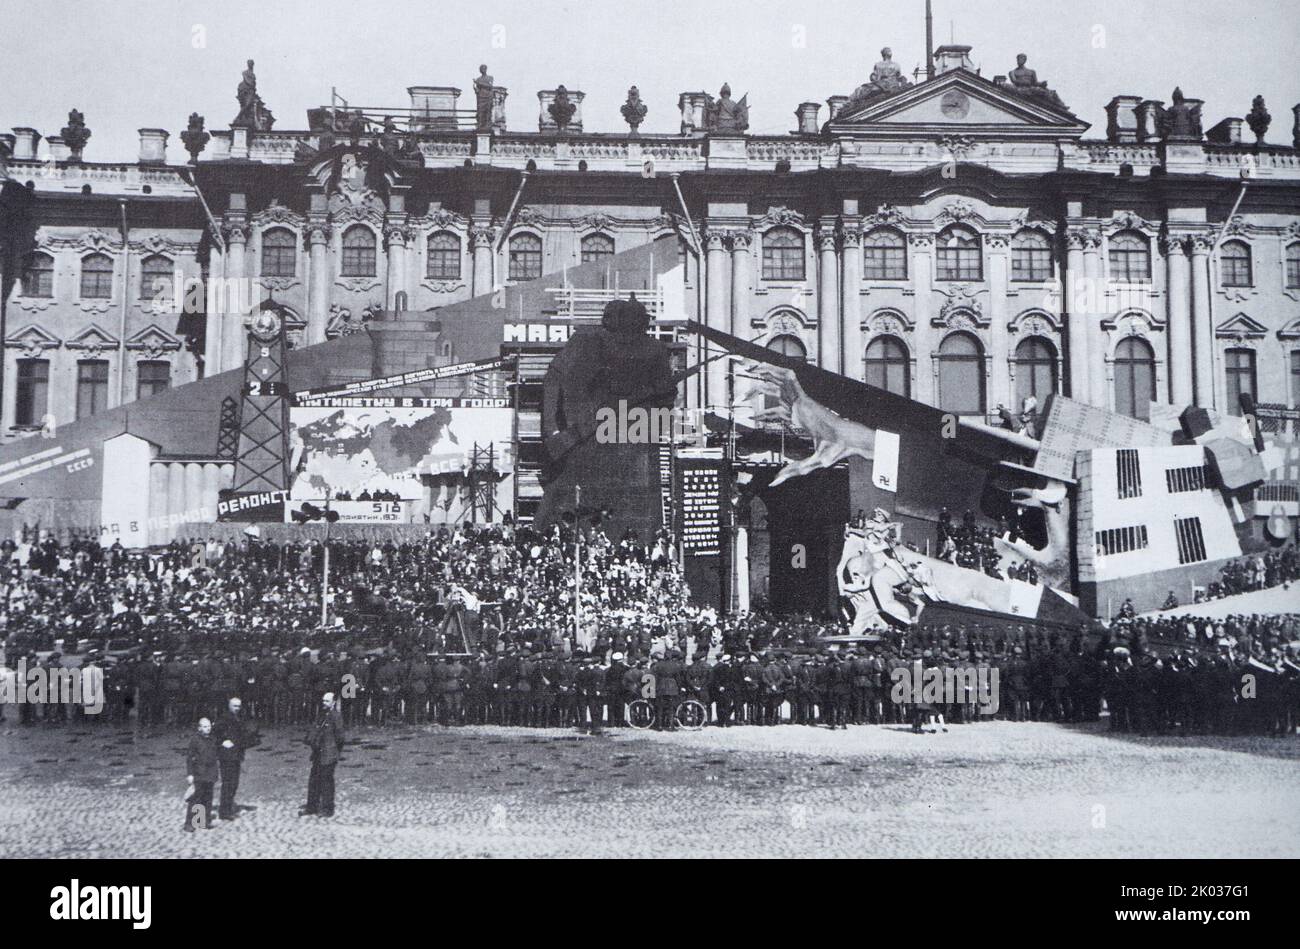 The brigade of the artistic association (ISORAM) under the leadership of M. S. Brodsky and L. I. Karataeva (K. I. Savishchenko, B. A. Belozerov, V. O. Meyer and others). A decorative installation that decorated the stands on Uritsky Square in Leningrad on May 1, 1931. Stock Photo